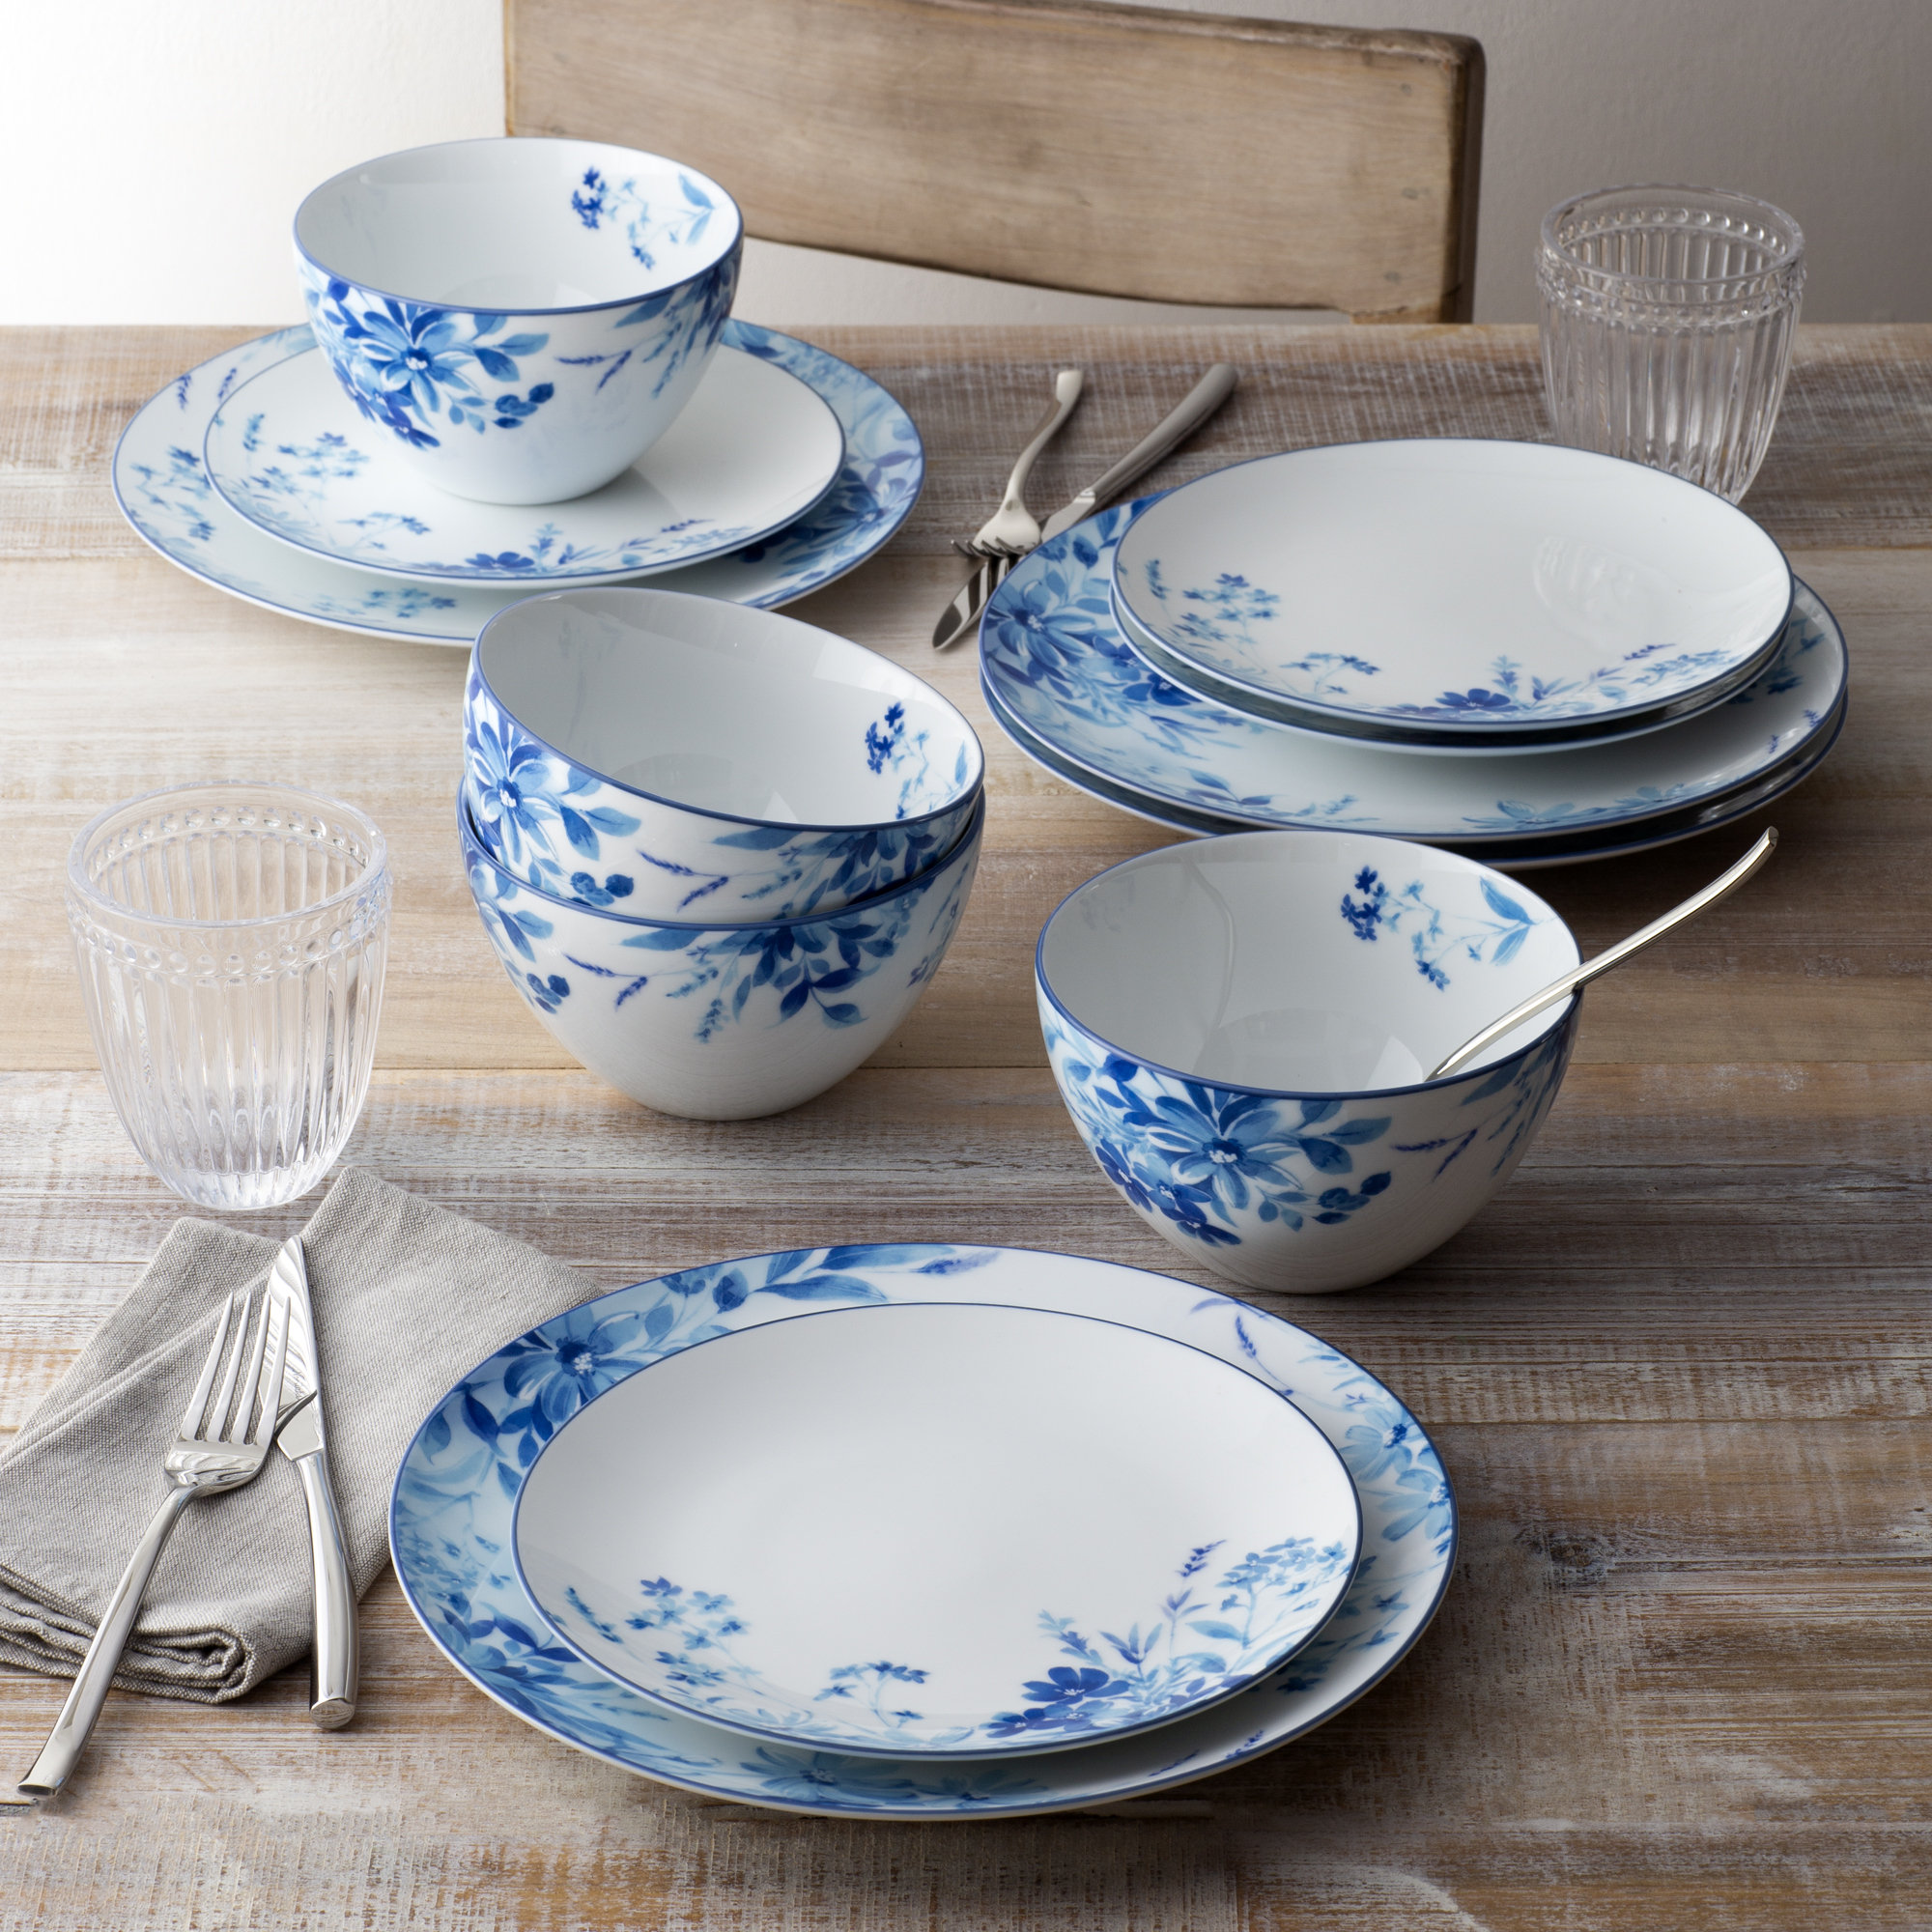 Noritake Bloomington Road (White and Blue) Porcelain 12-Piece Dinnerware Set,  Service for 4 1733-12E - The Home Depot